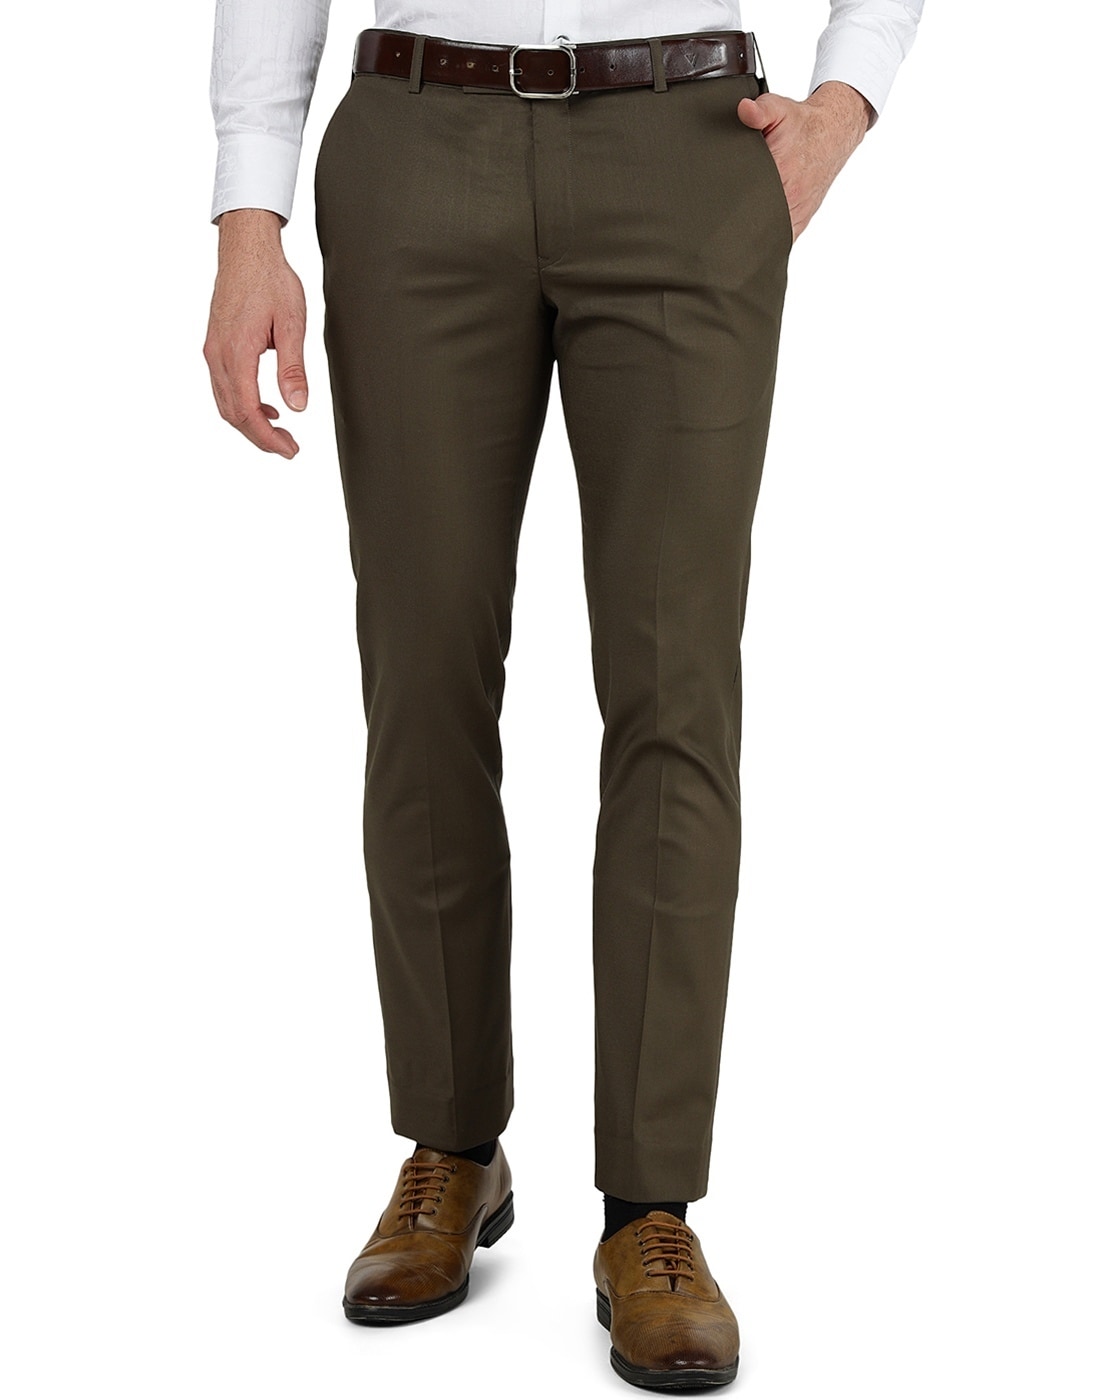 Buy Black Trousers & Pants for Men by TWILLS Online | Ajio.com